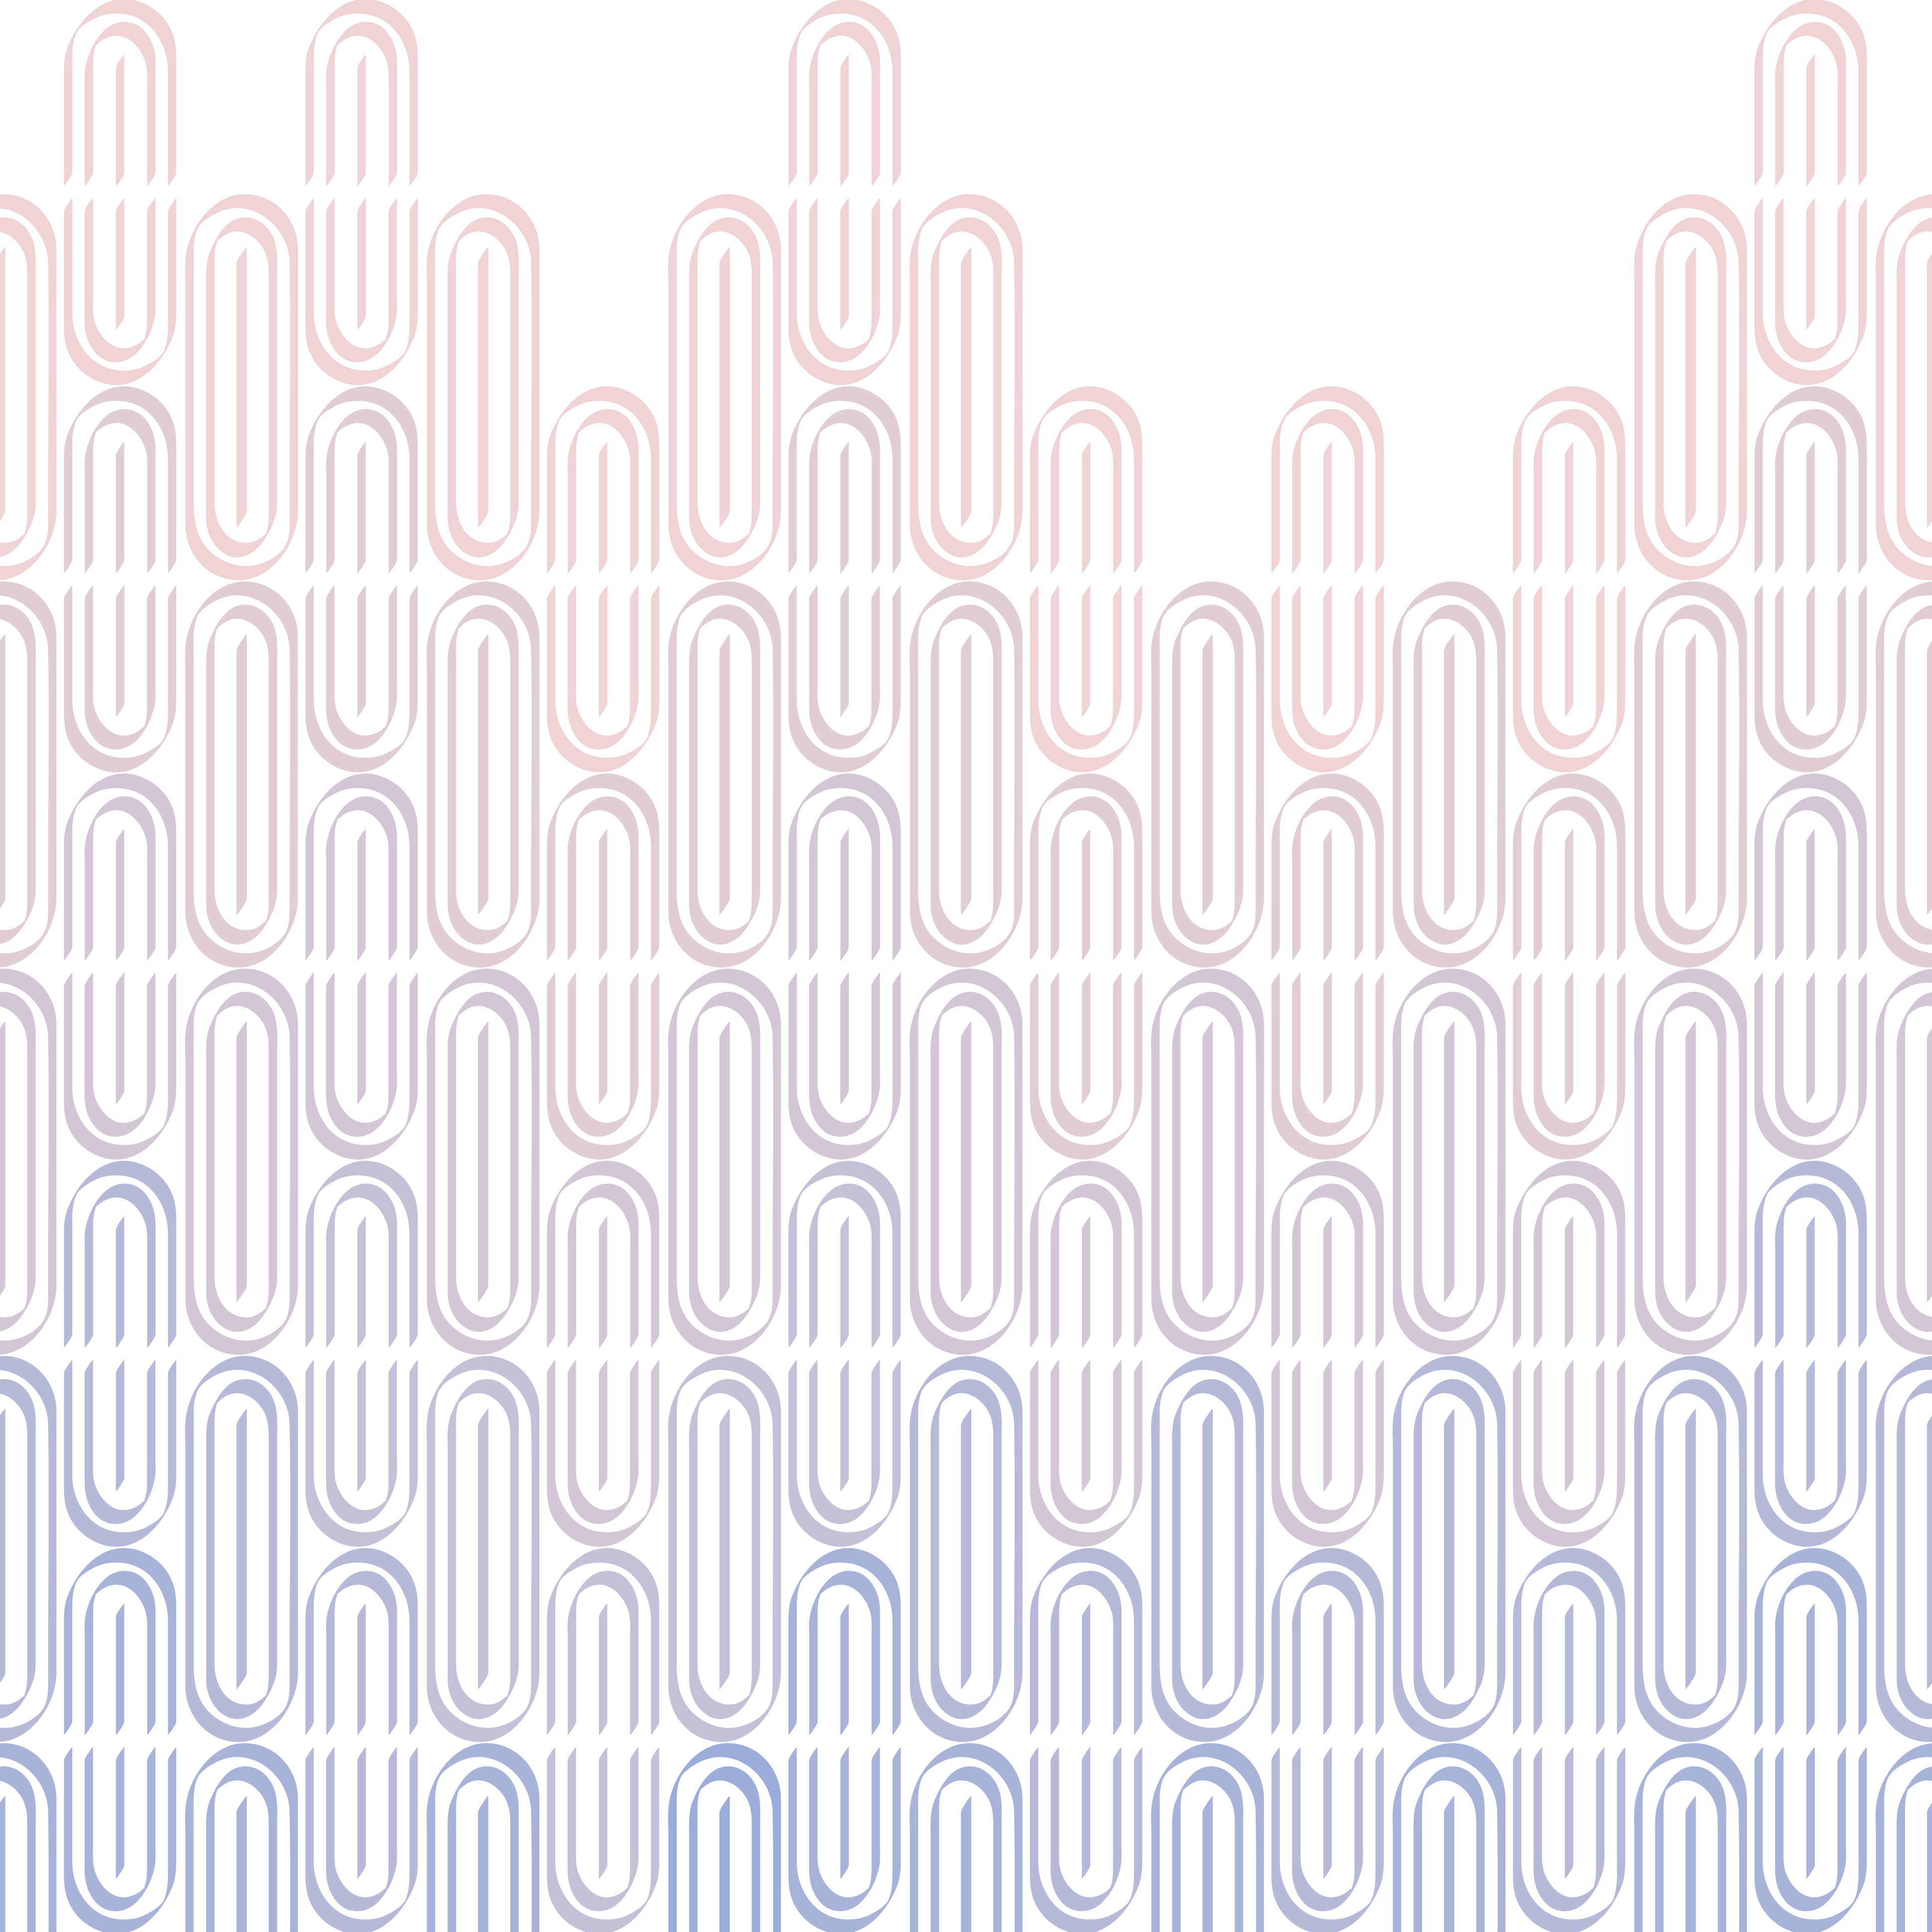 Vector seamless horisontal pattern. Modern stylish texture. Repeating geometric shapes from rose quartz to serenity colors.